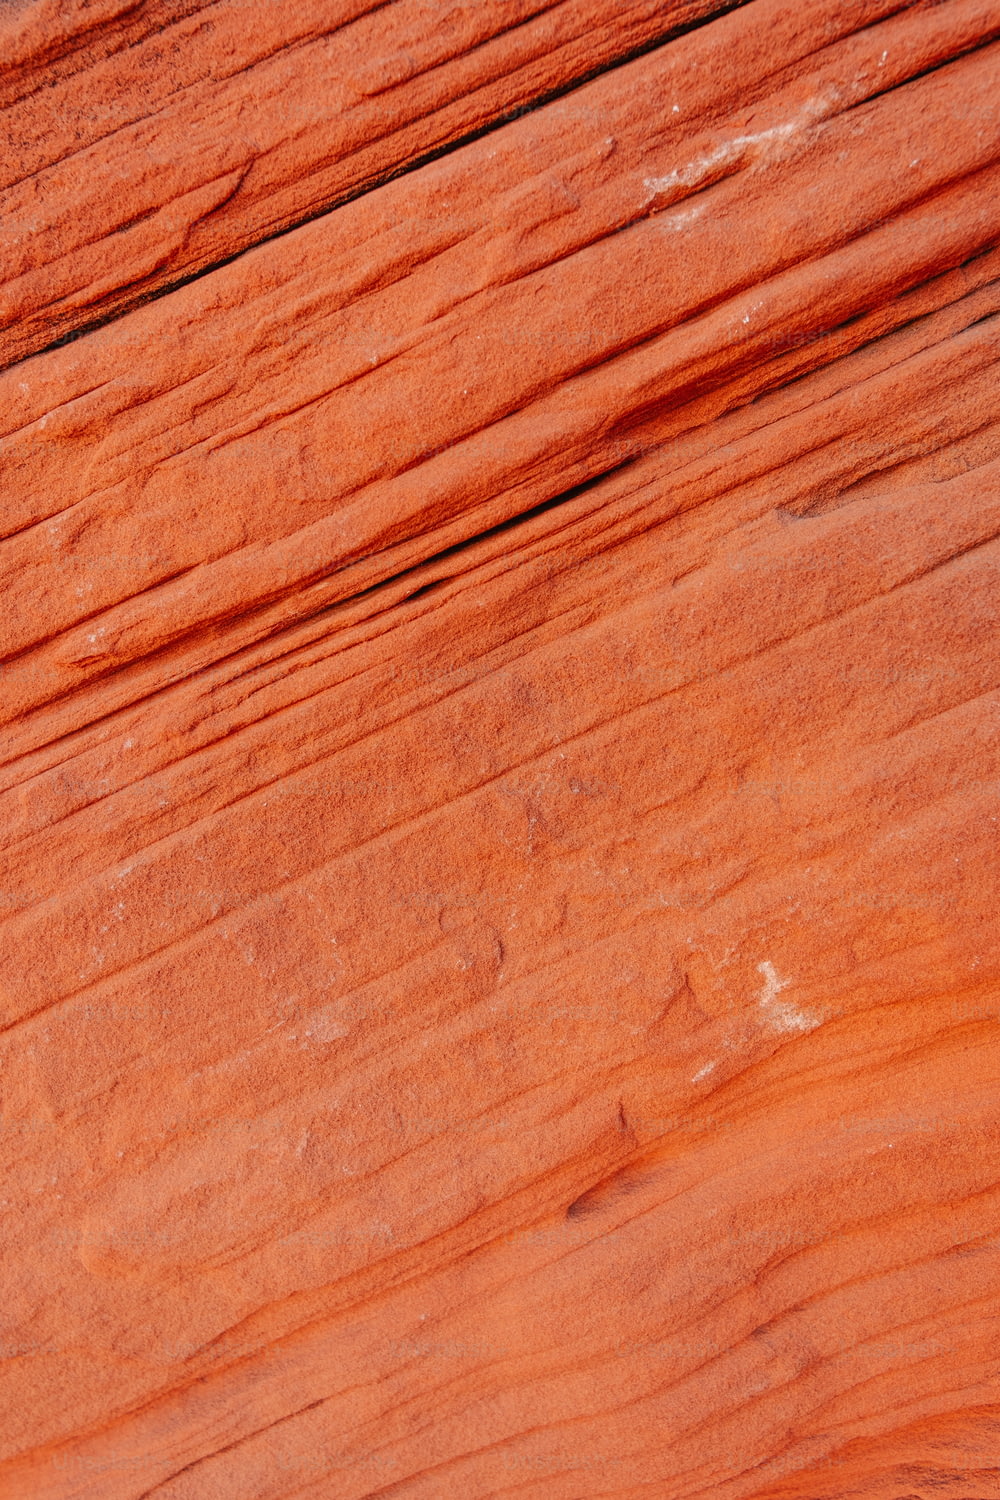 a bird is perched on a red rock